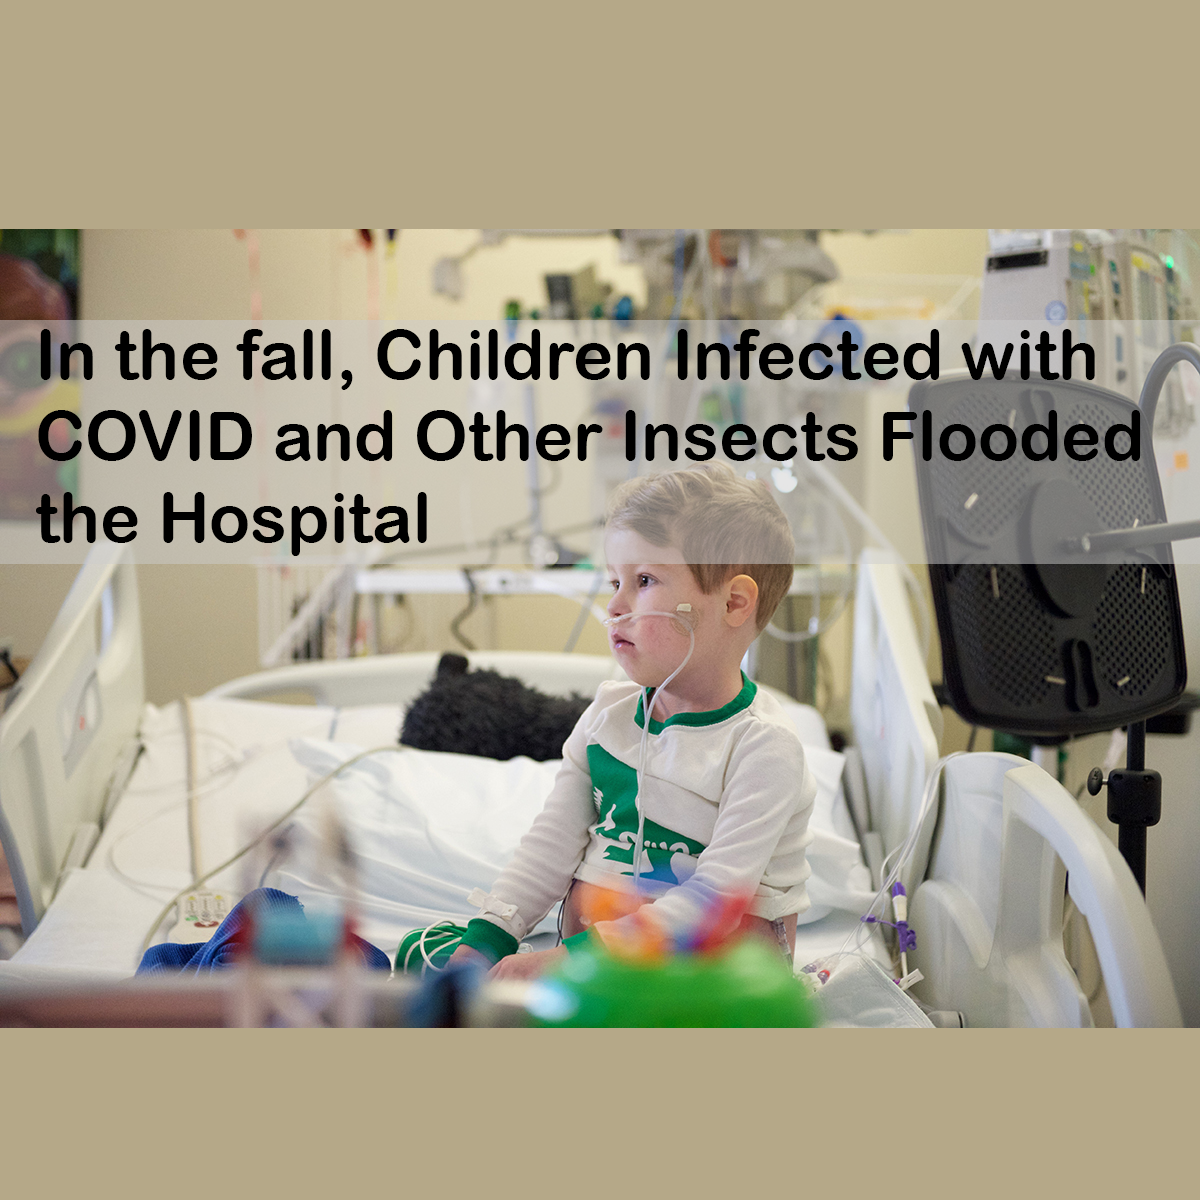 In the fall, Children Infected with COVID and Other Insects Flooded the Hospital